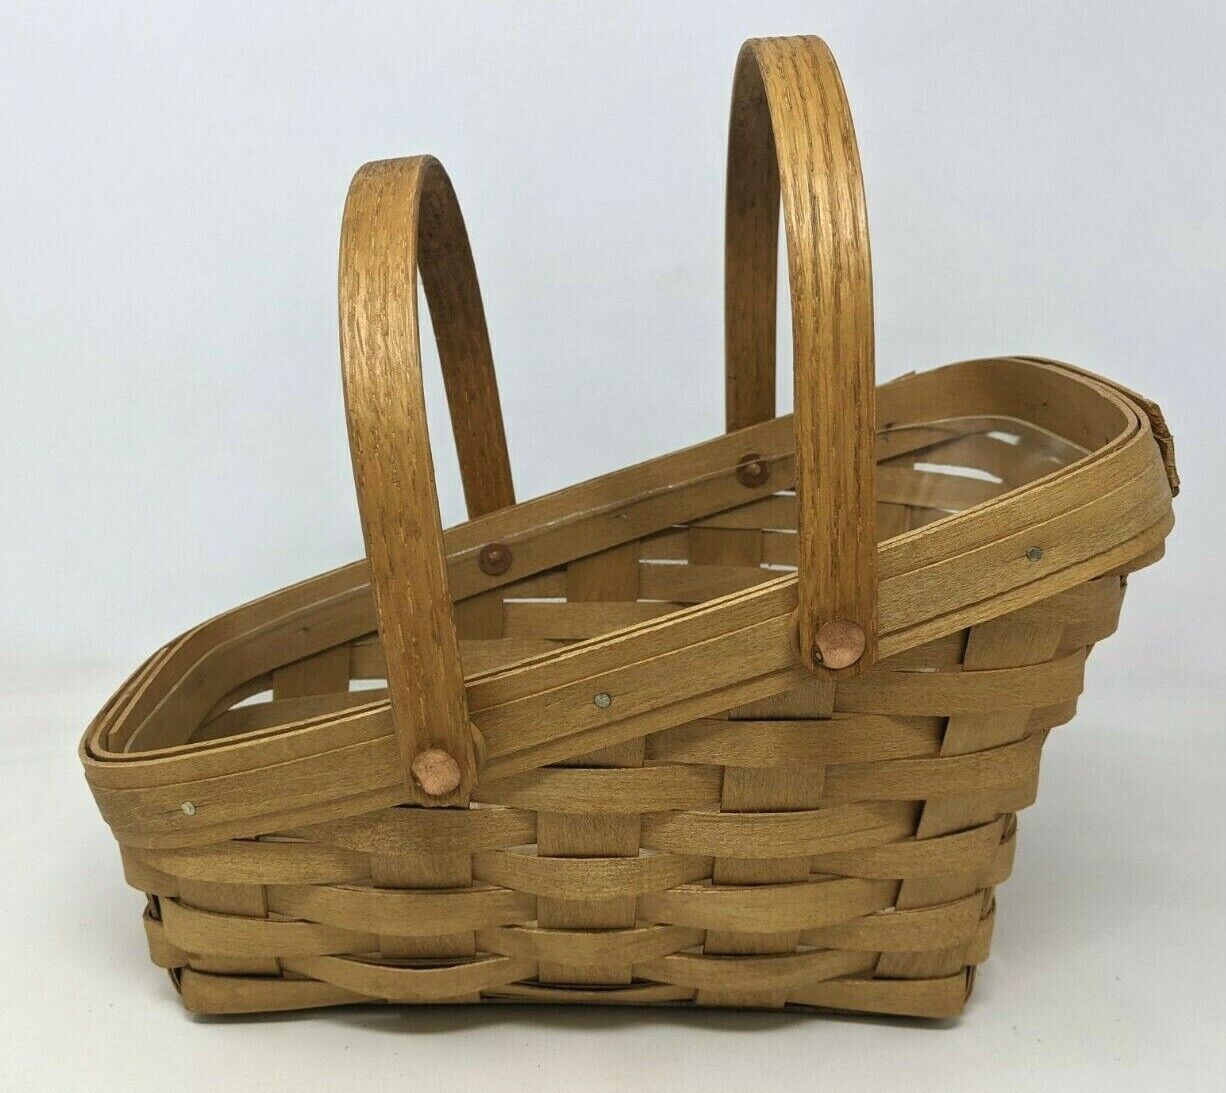 VTG 1995 American Traditions Small Slanted Vegetable Woven Basket Protector SS21